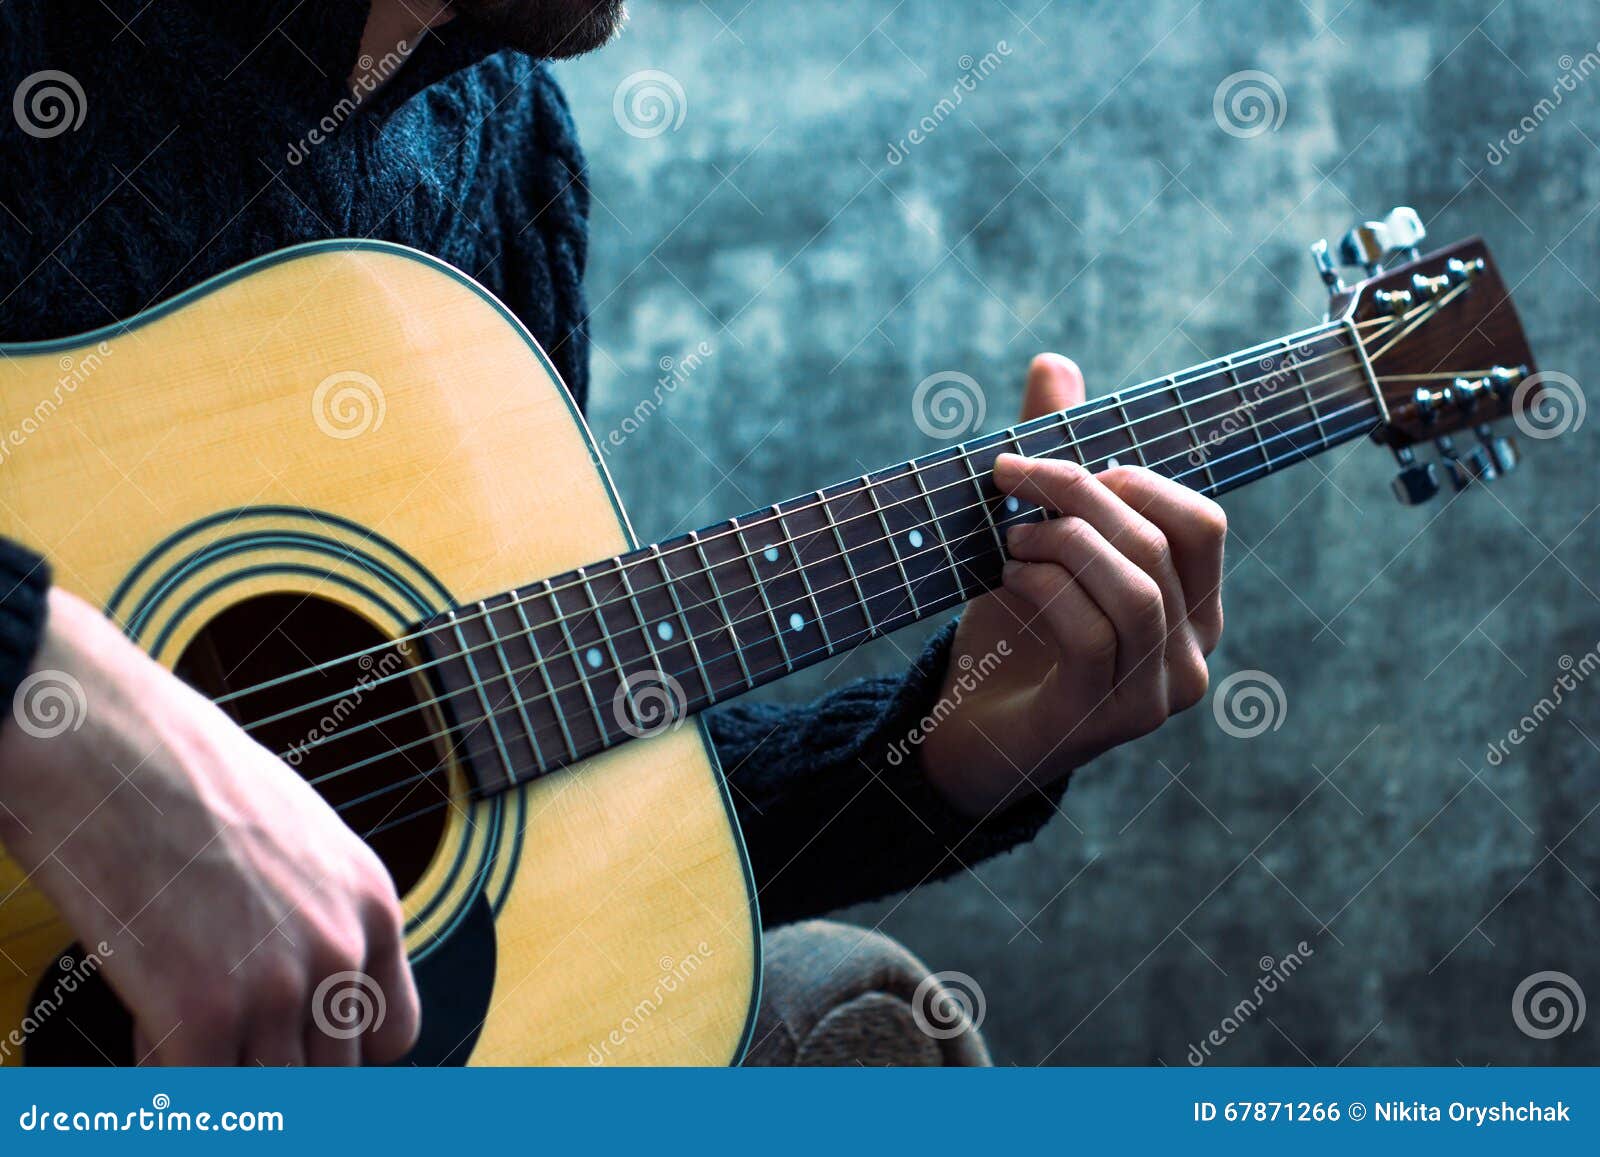 young man playing an acoustic guitar on the background of a concrete wall